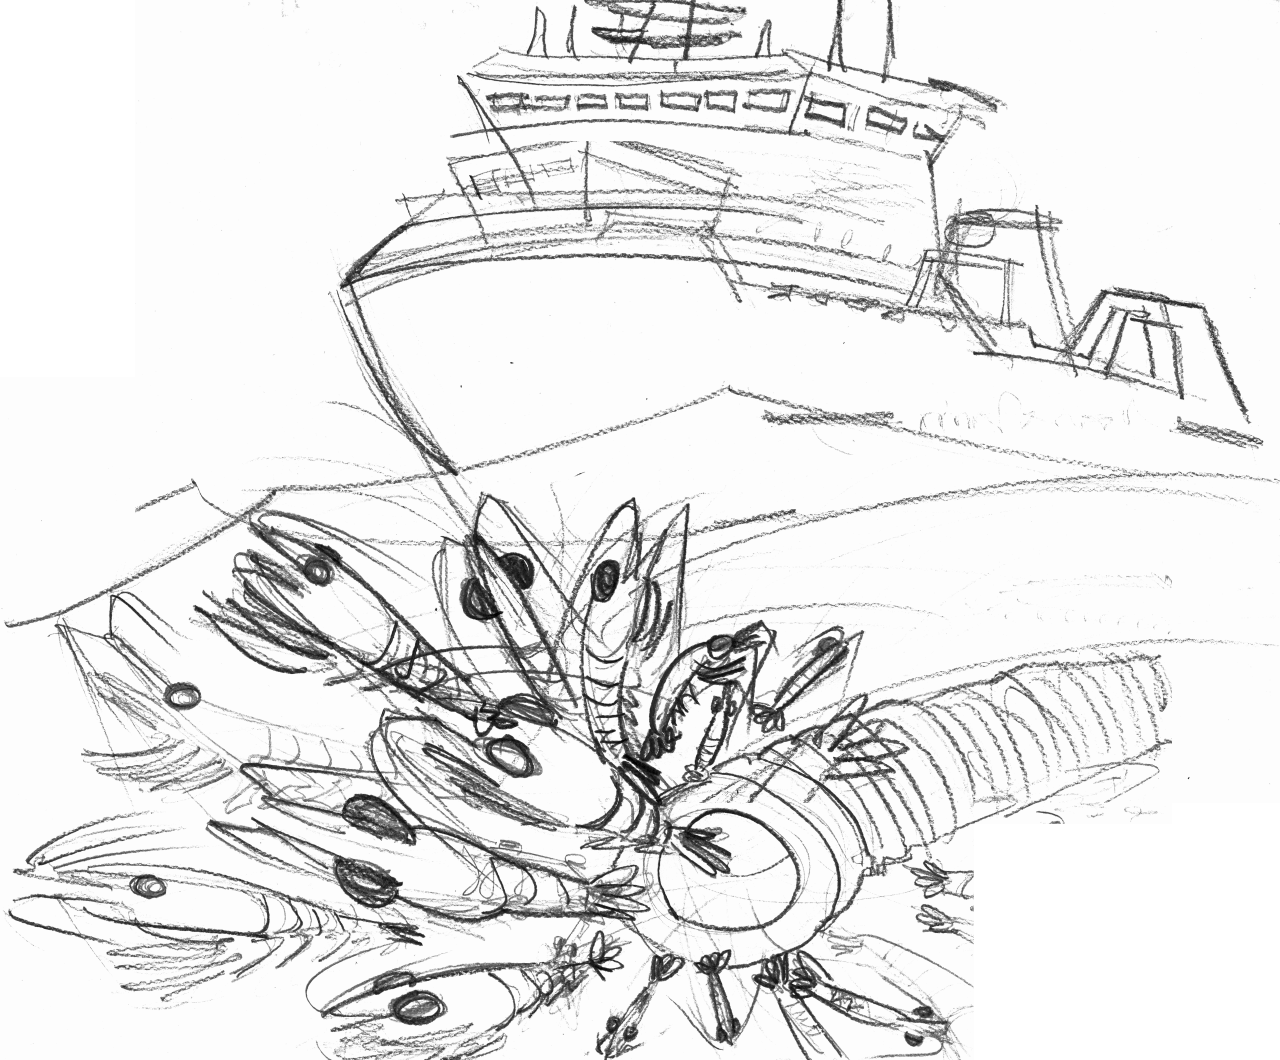 sea shepherd operation krill campaign rough thumnail comp sketch